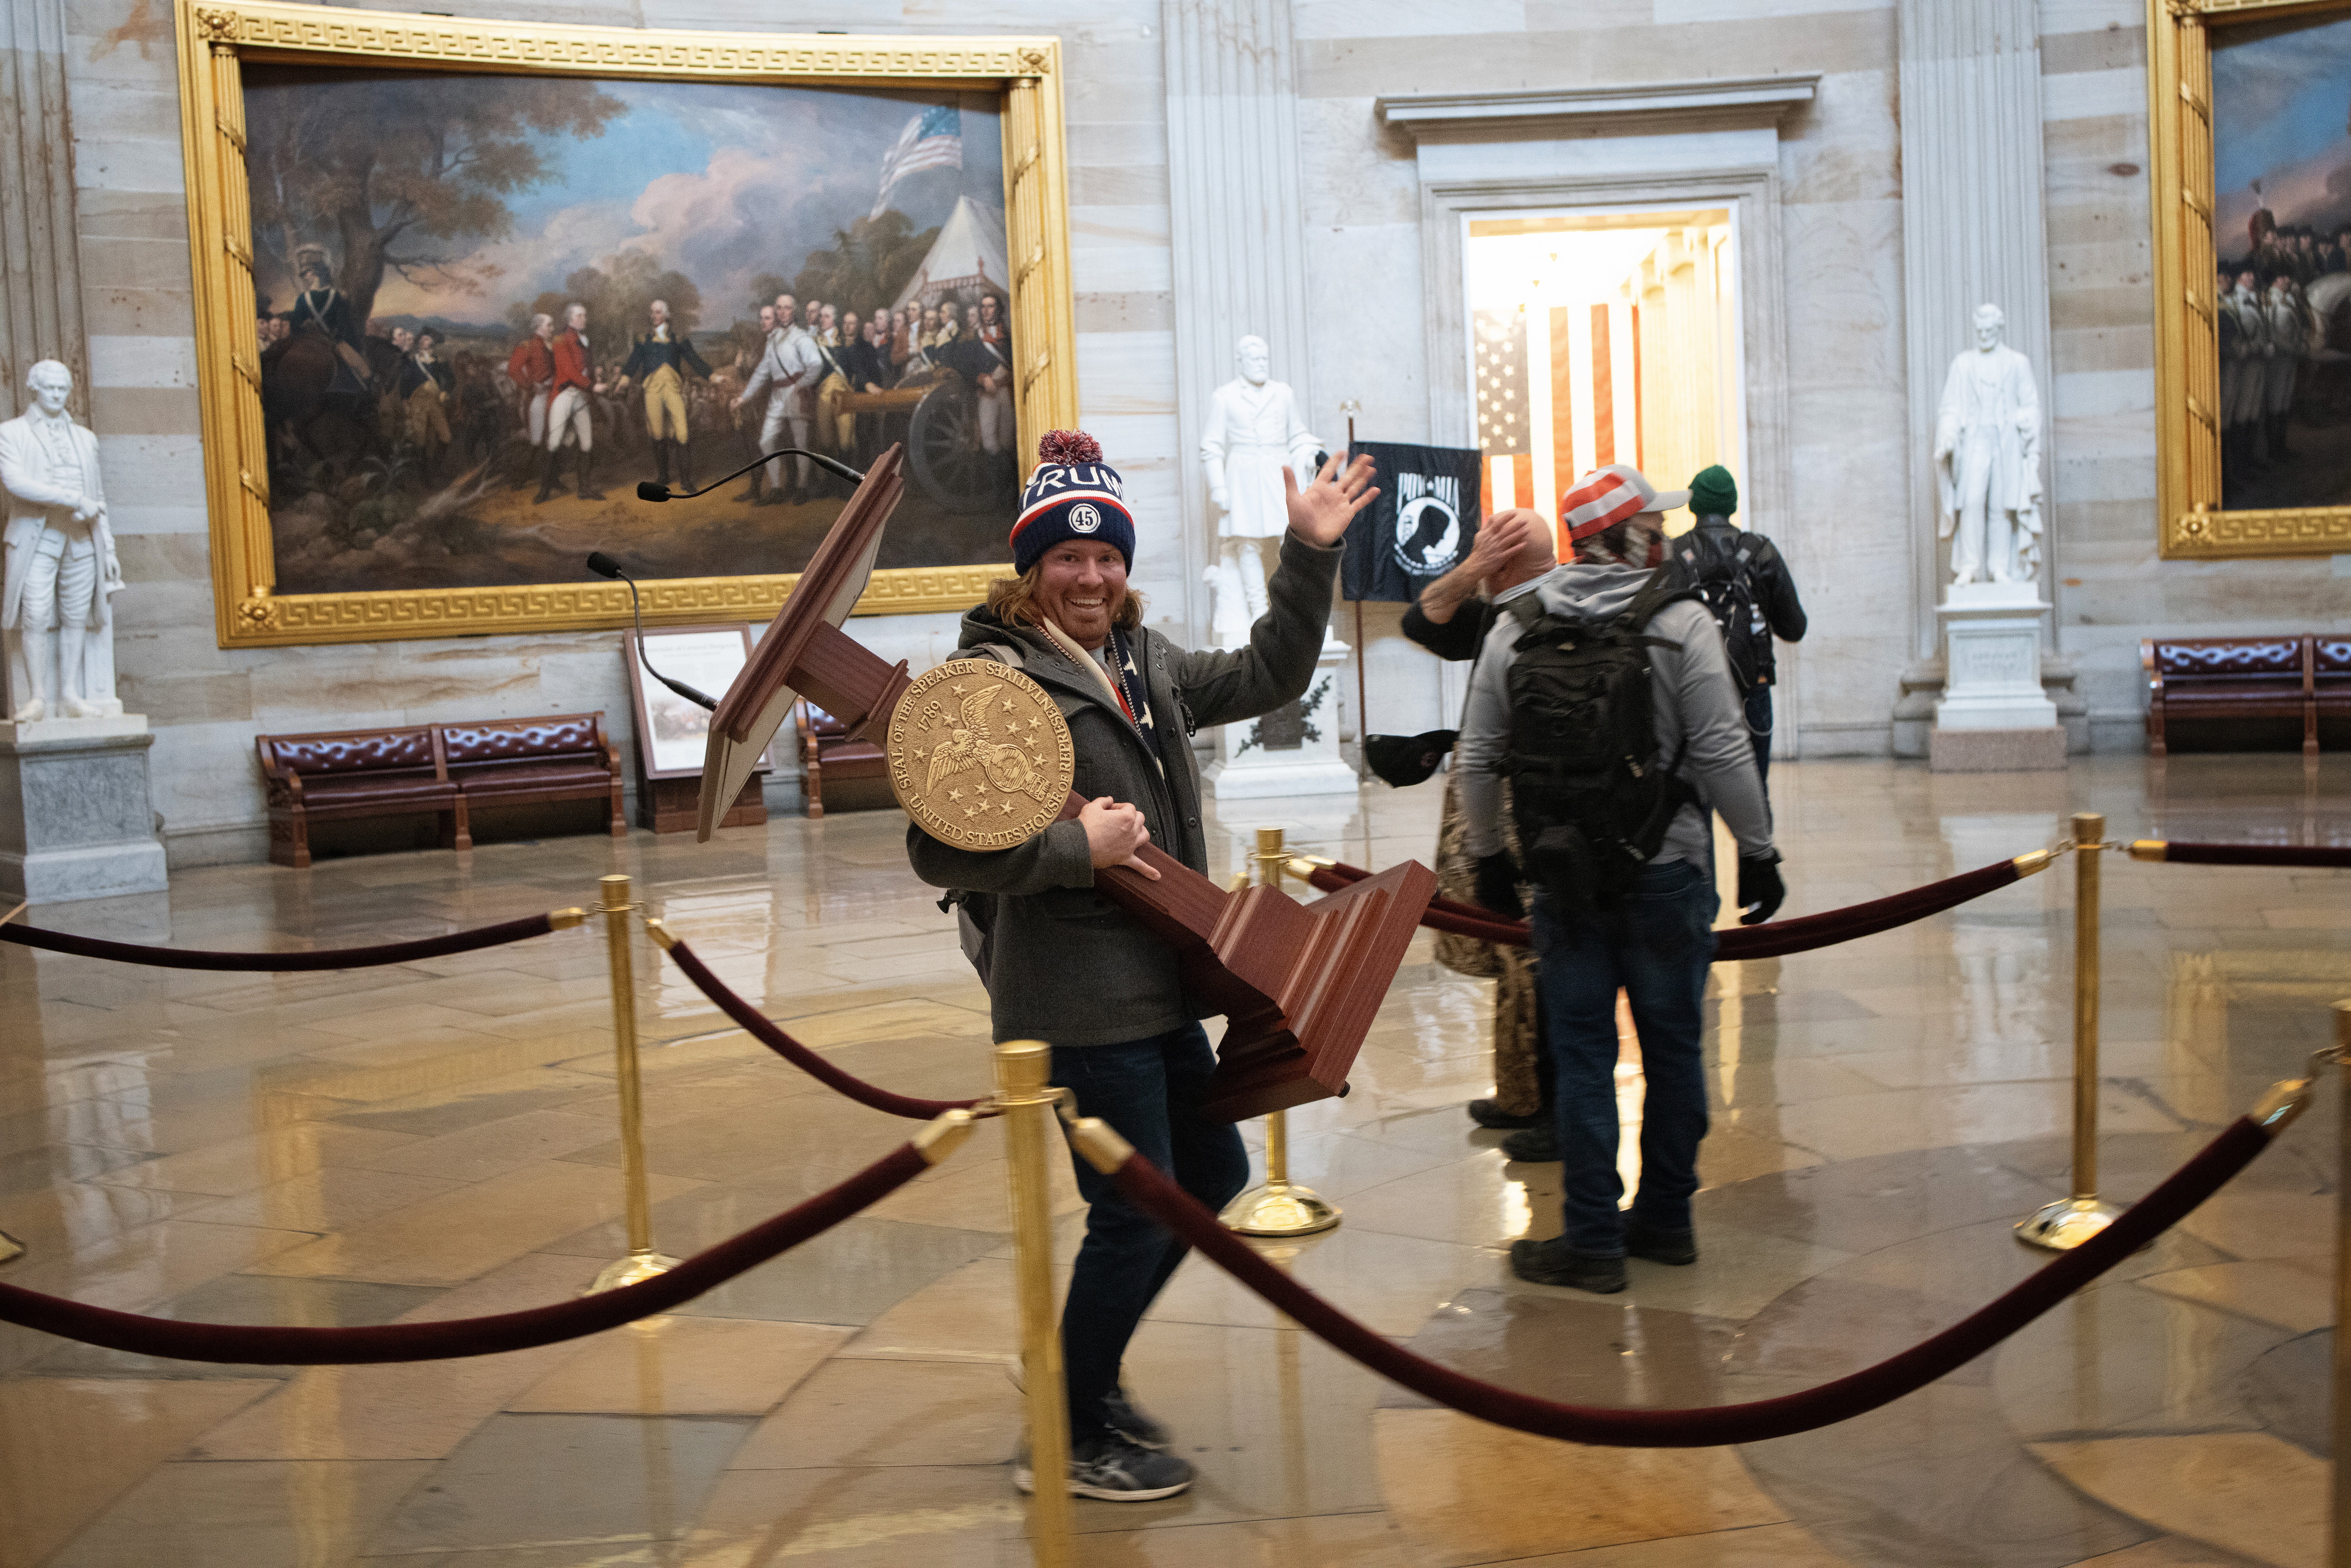 Adam Christian Johnson, 36, who took away a lectern waving to the camera, became one of the most prominent symbols of the Capitol riots